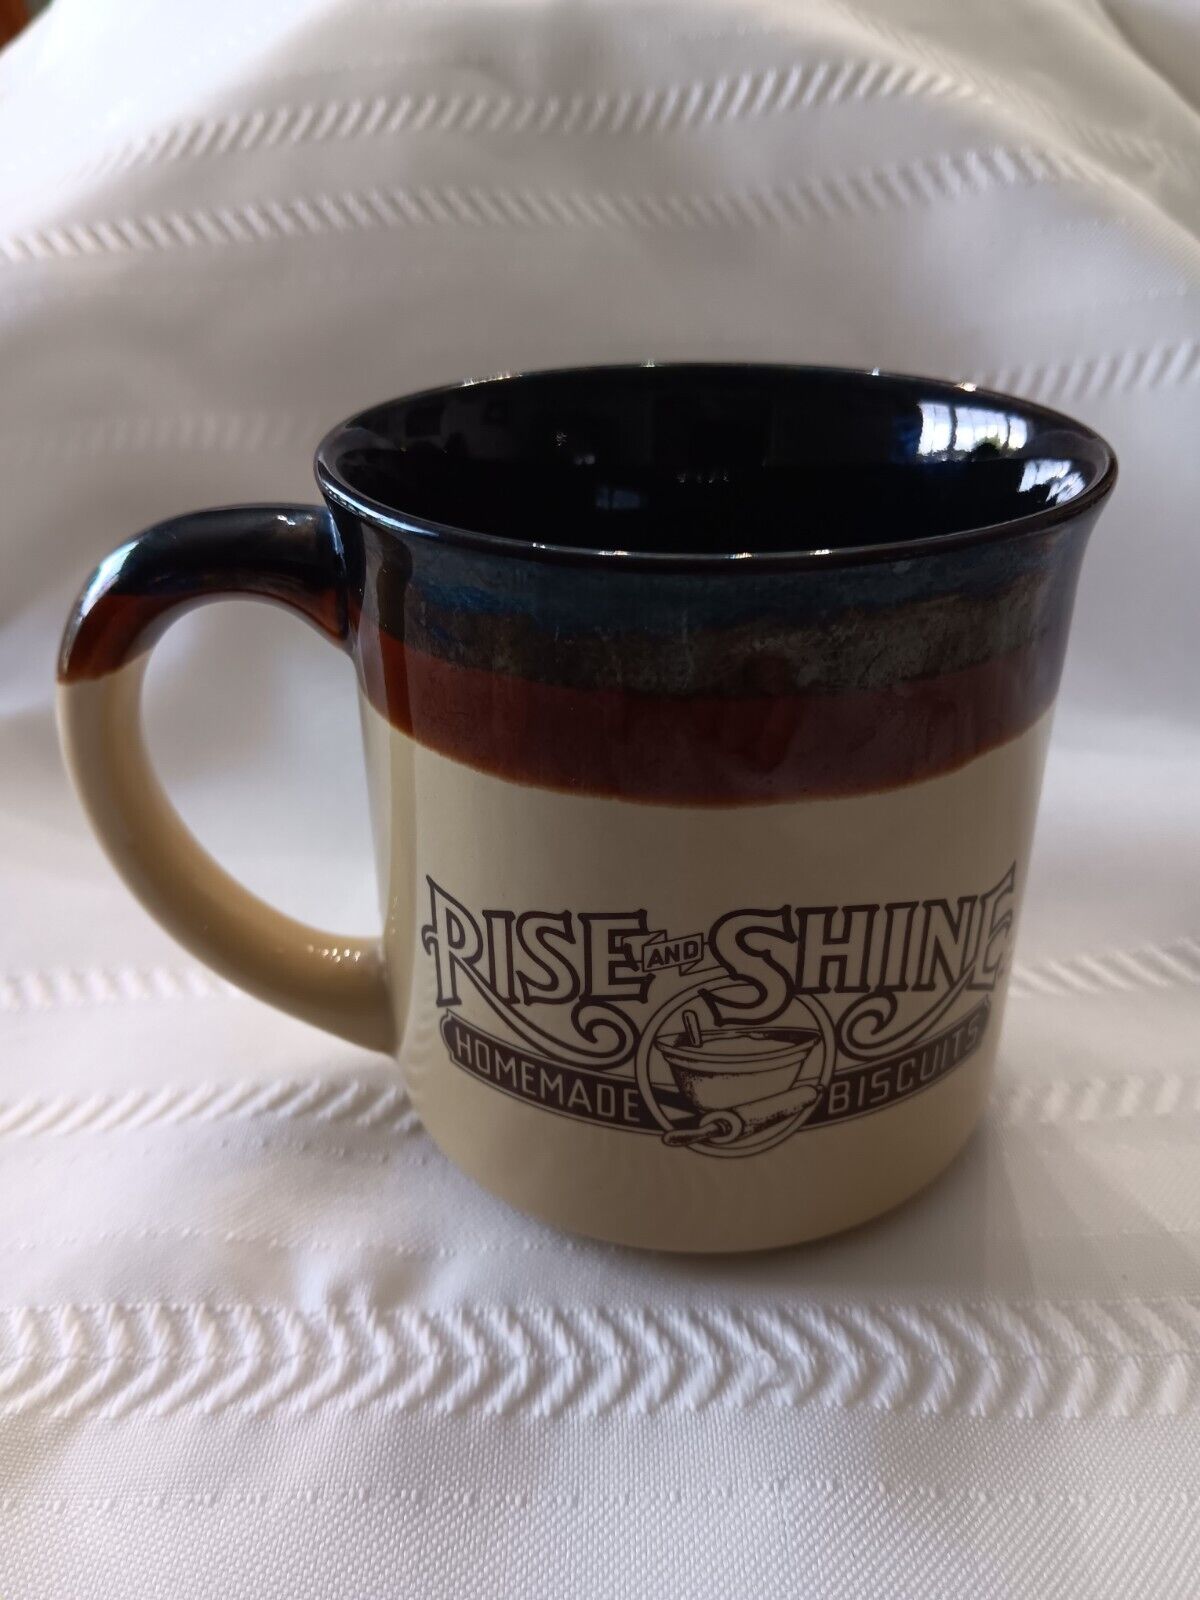 Vintage Hardee\'s Rise and Shine Homemade Biscuits Ceramic Coffee Mug Cup 1986